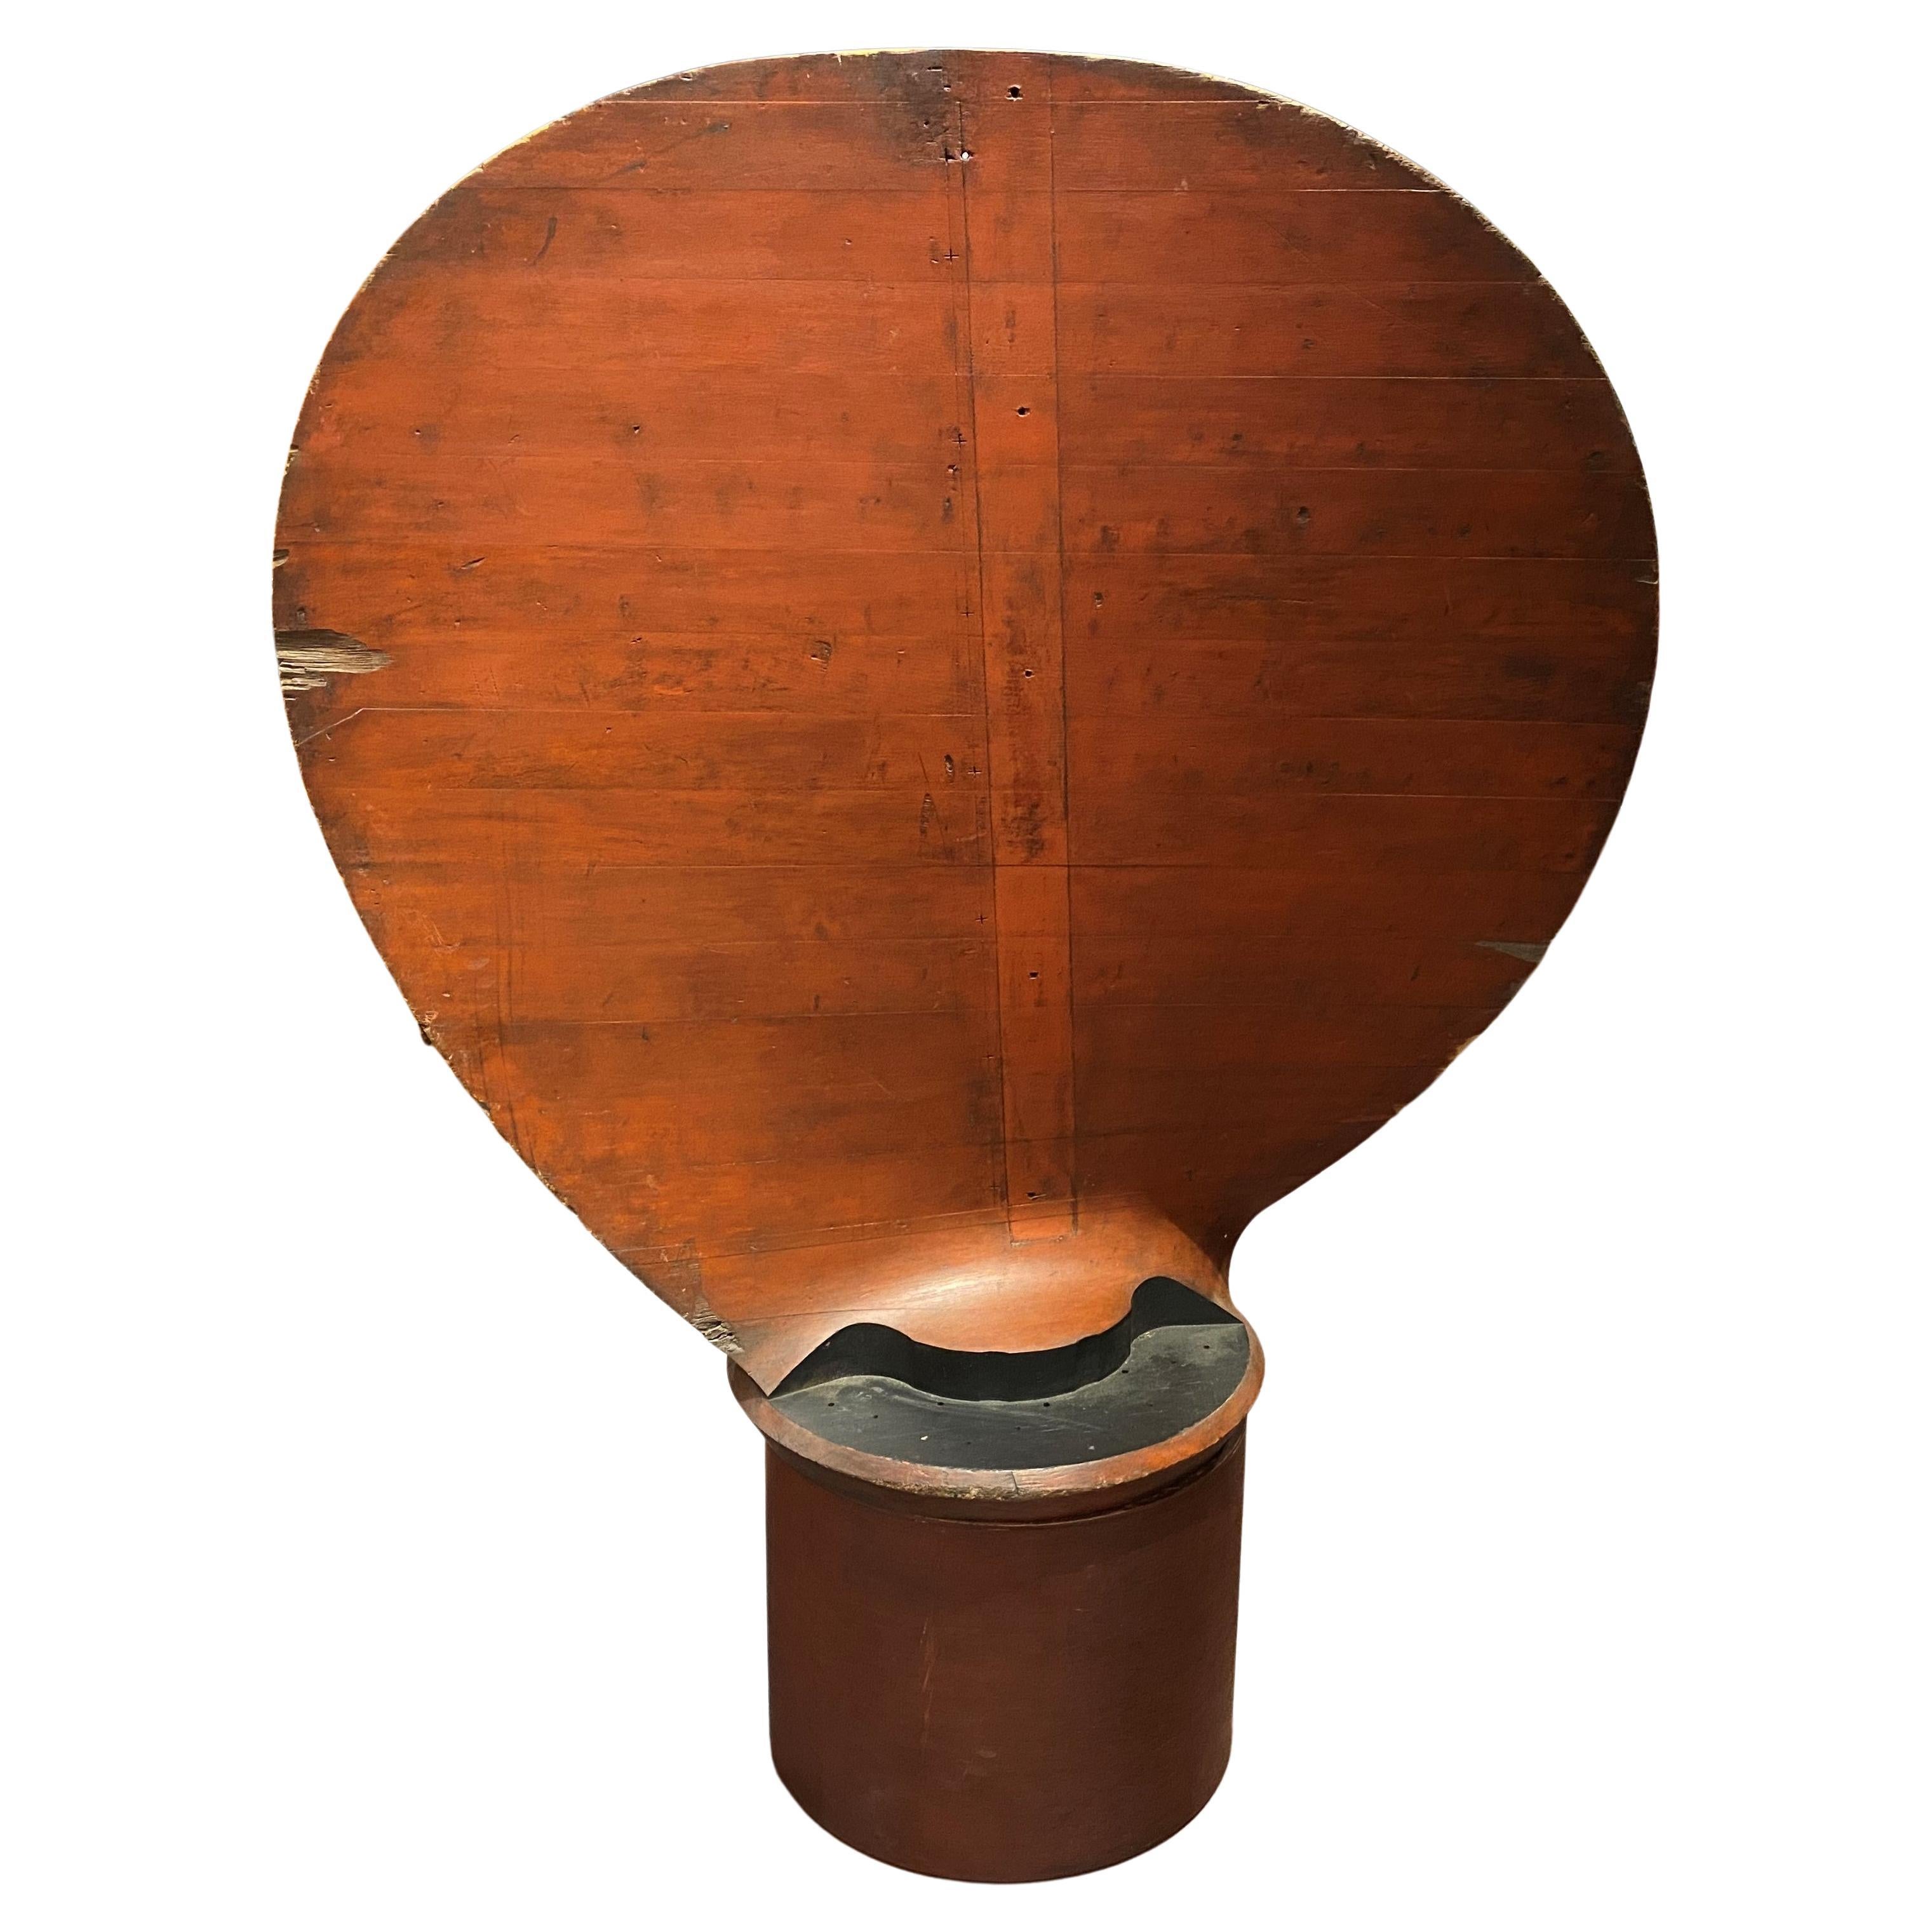 Large Wooden Ship’s Propeller Blade Foundry Casting Mold on Plinth